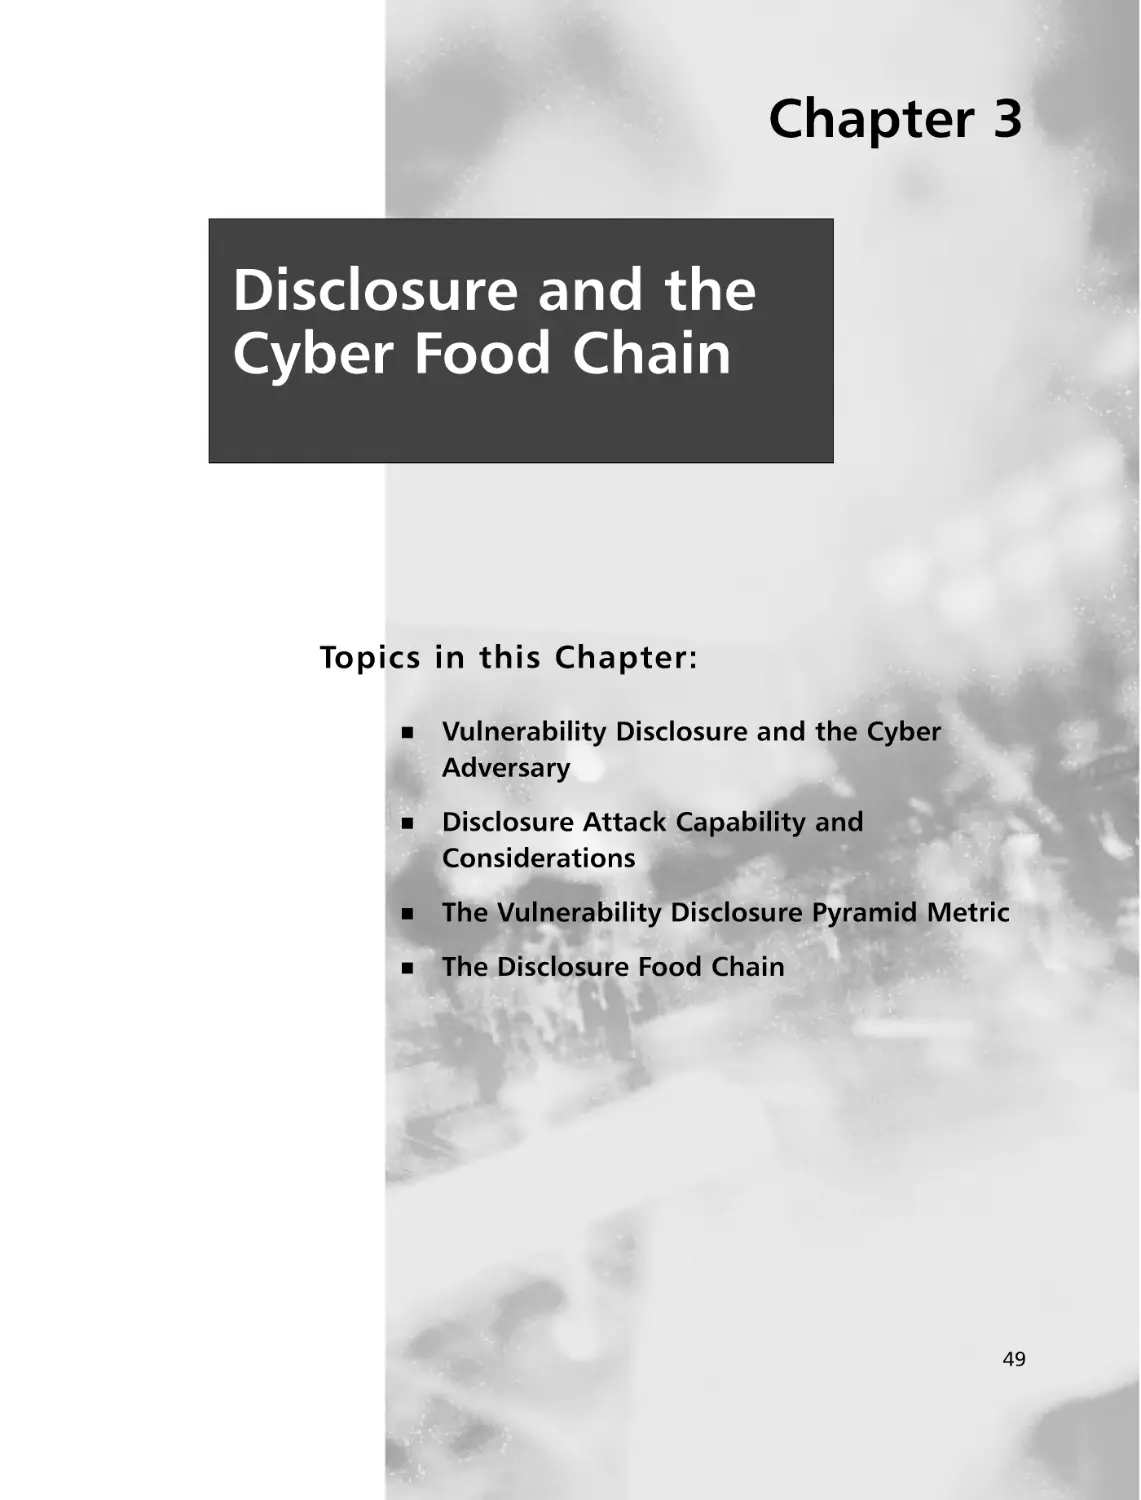 Chapter 3 Disclosure and the Cyber Food Chain